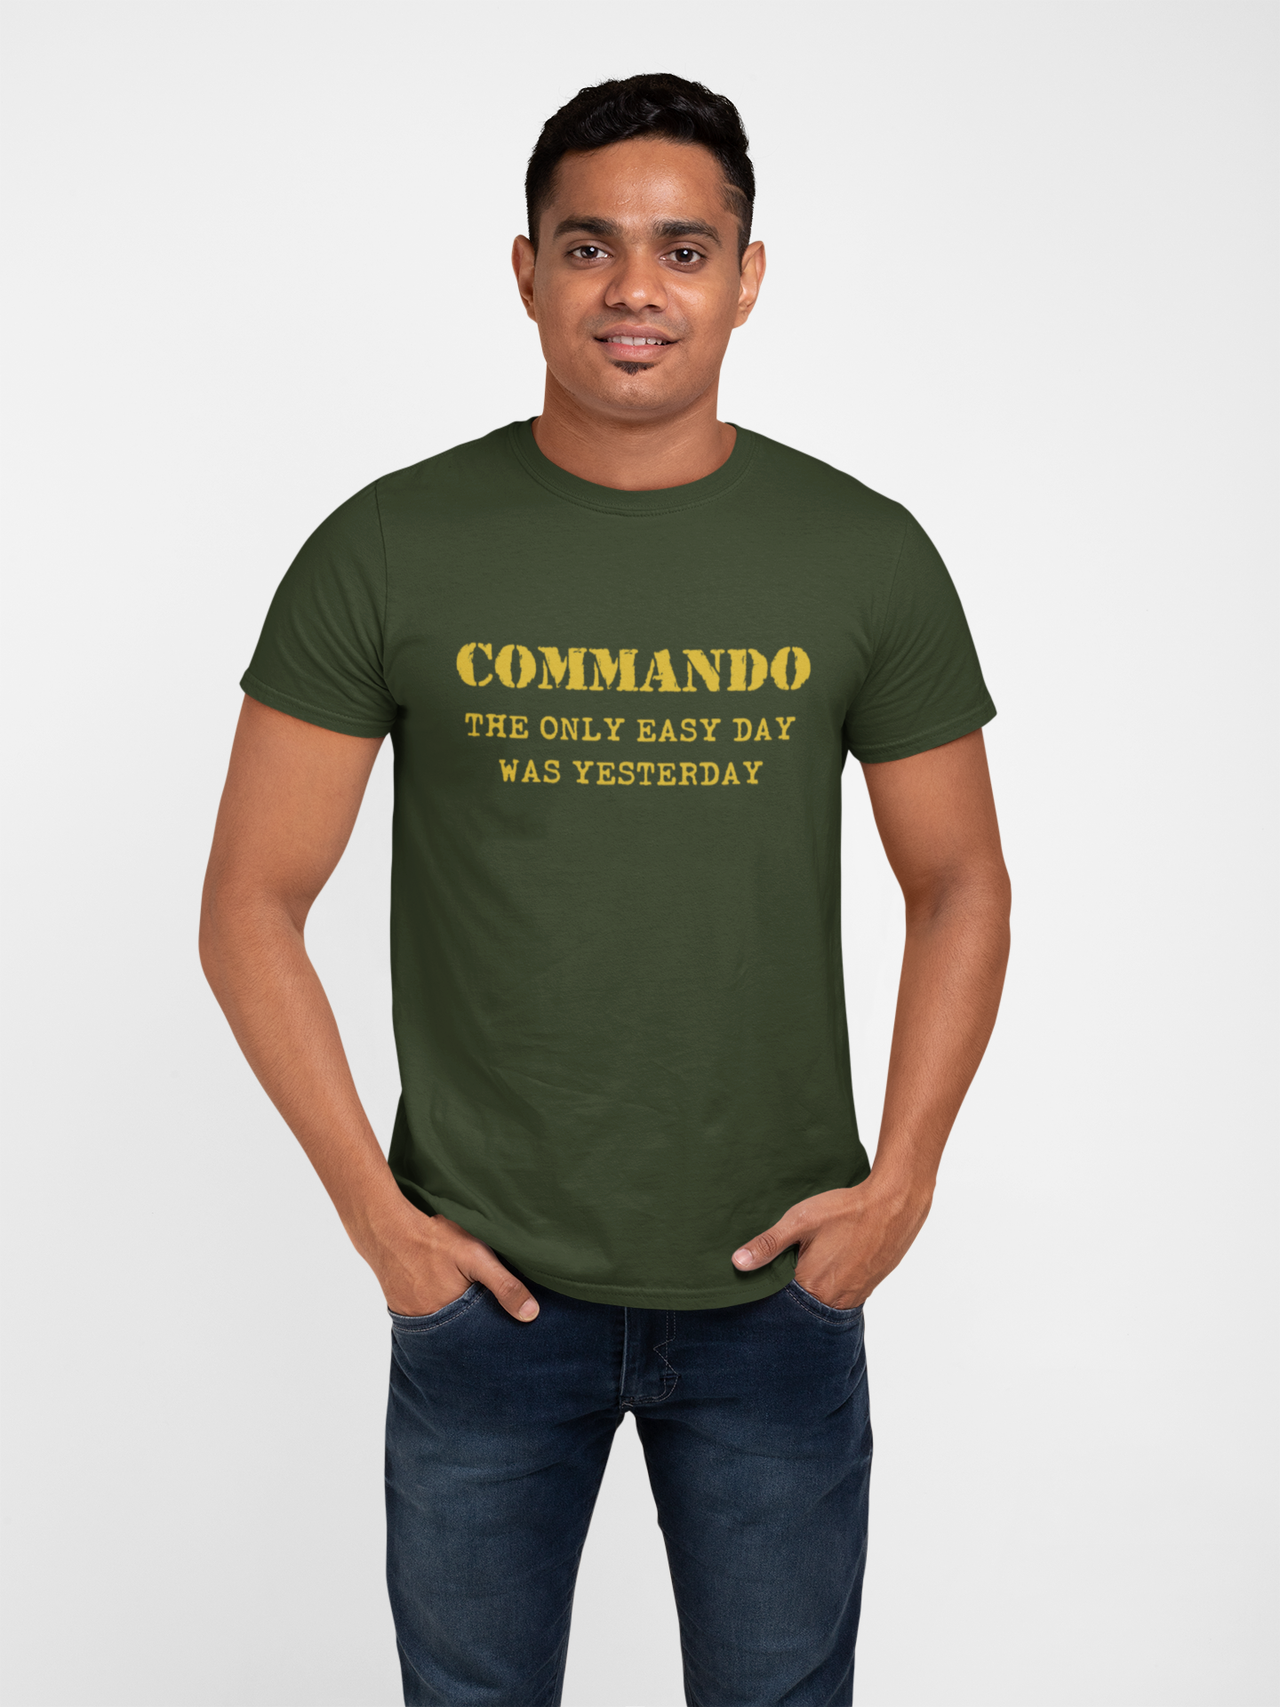 Commando T-shirt - Commando - The Only Easy Day Was Yesterday (Men)